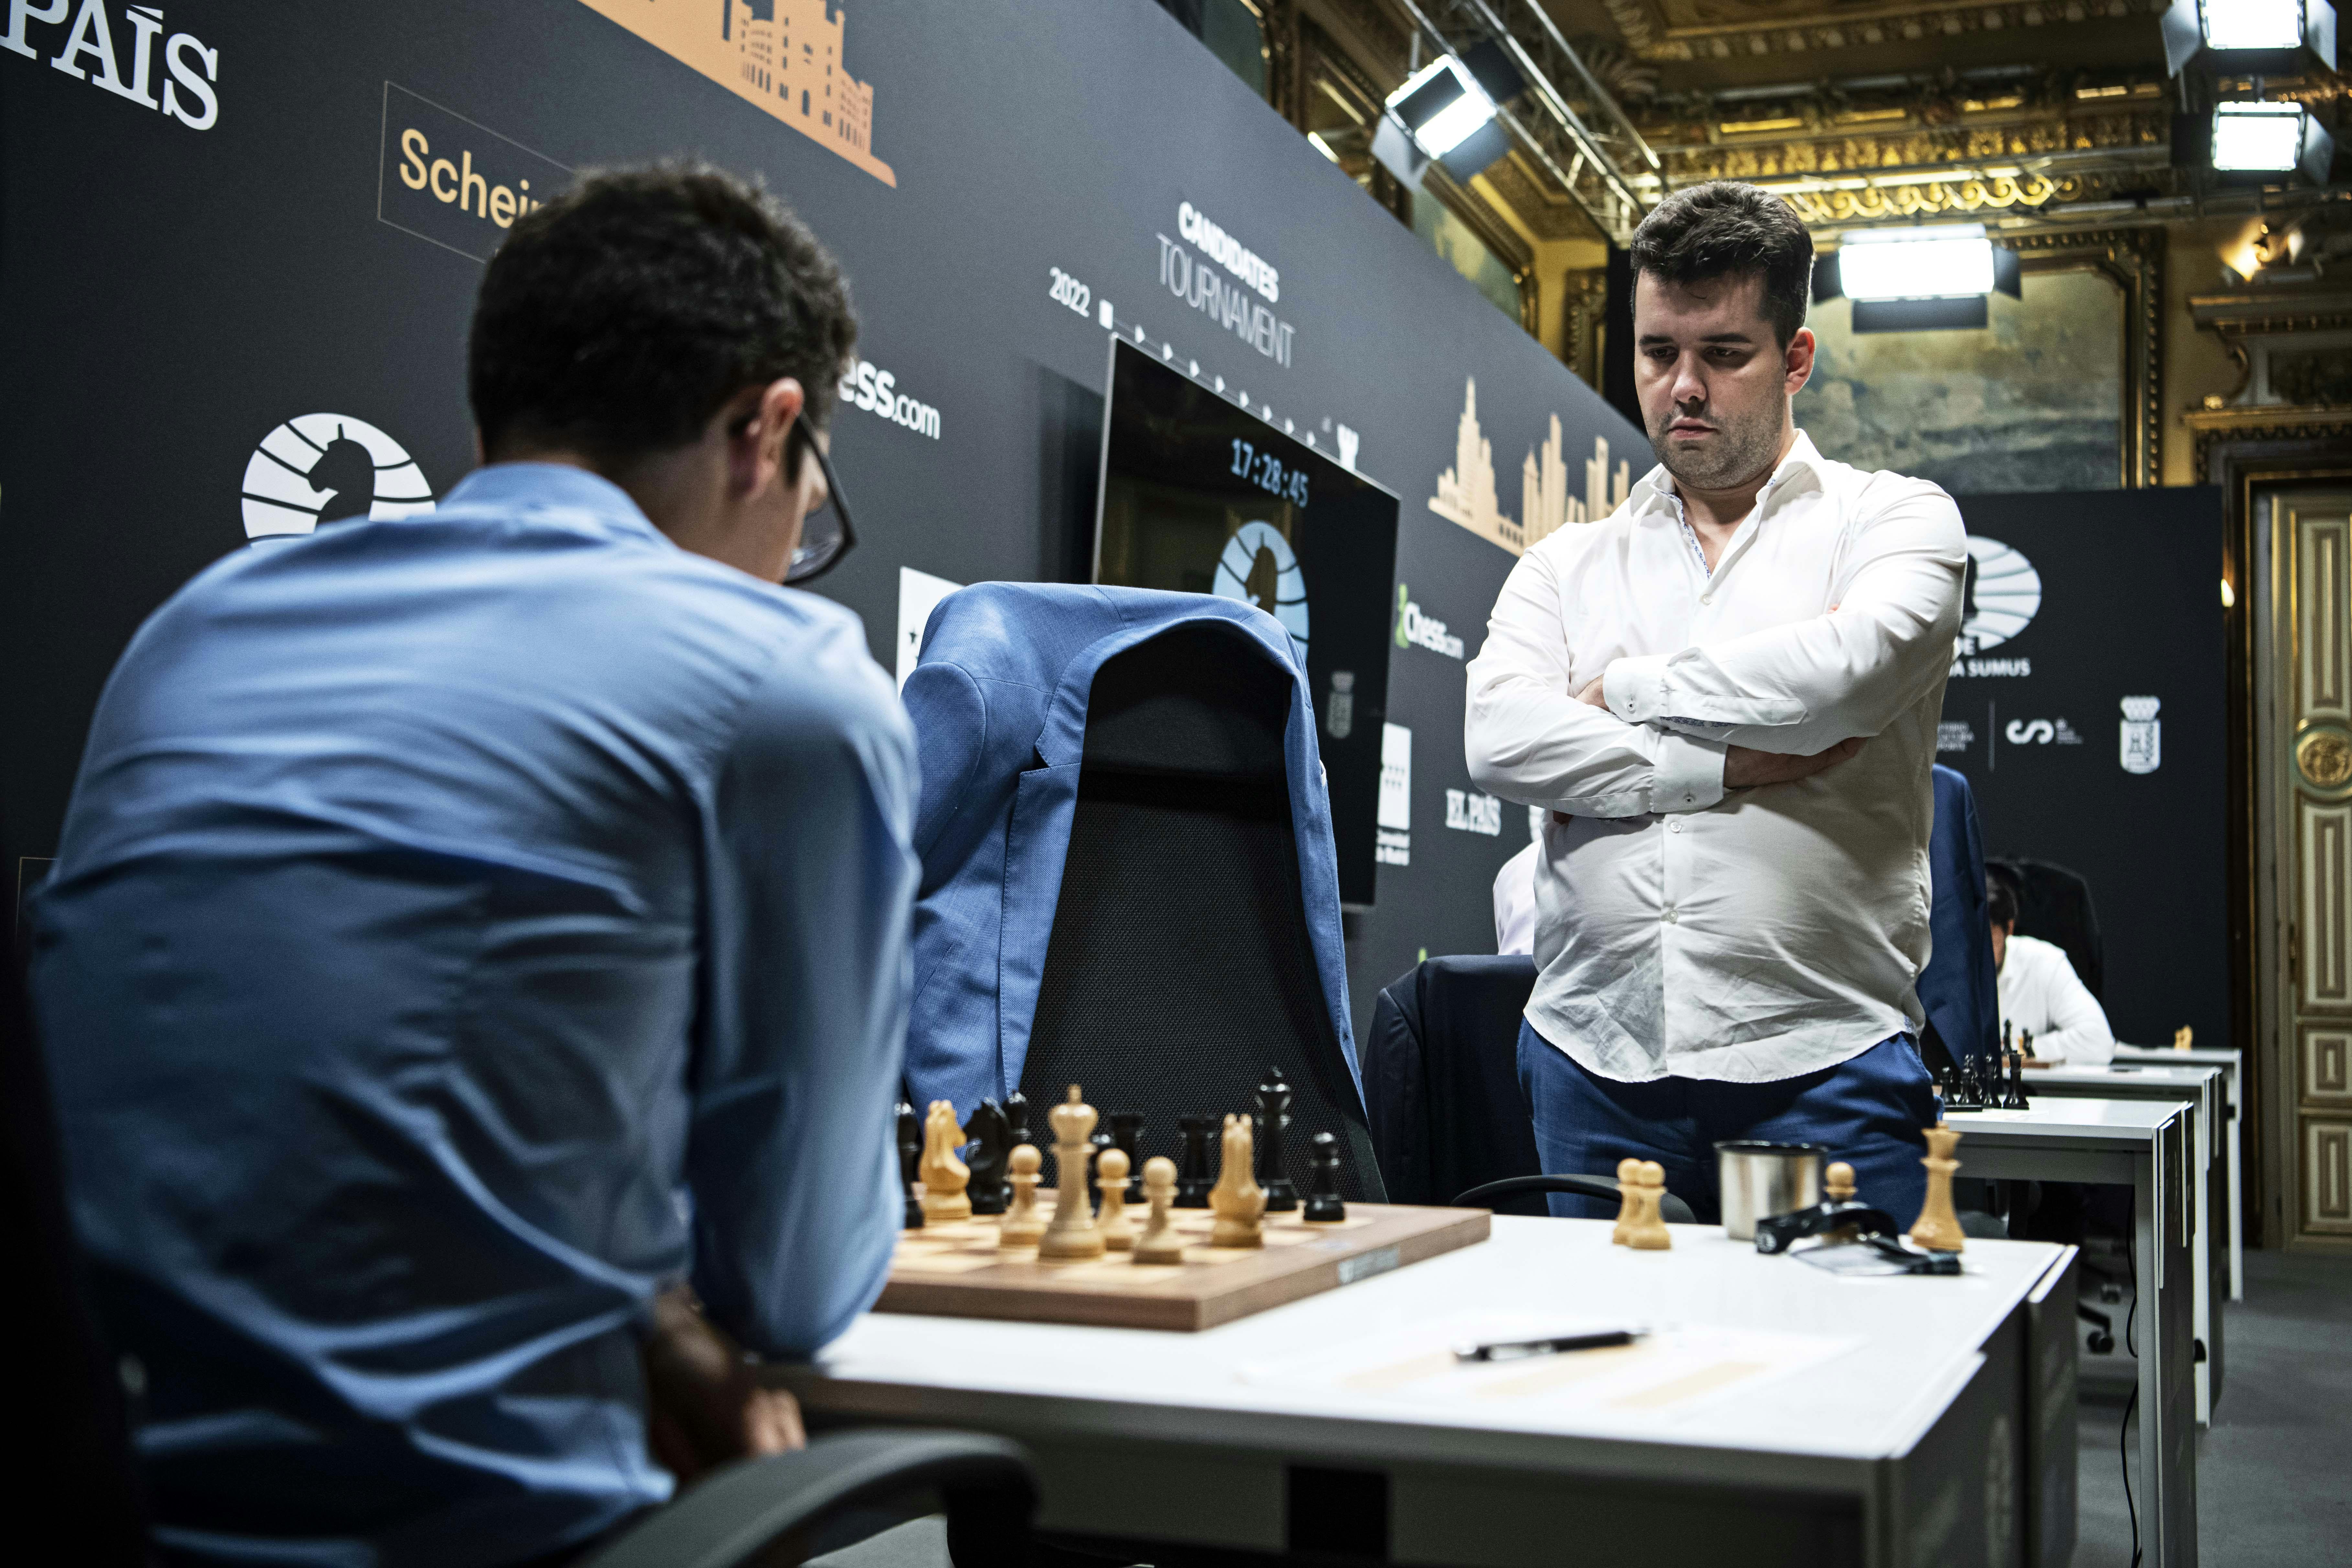 Nepomniachtchi wins his 2nd Candidates Tournament